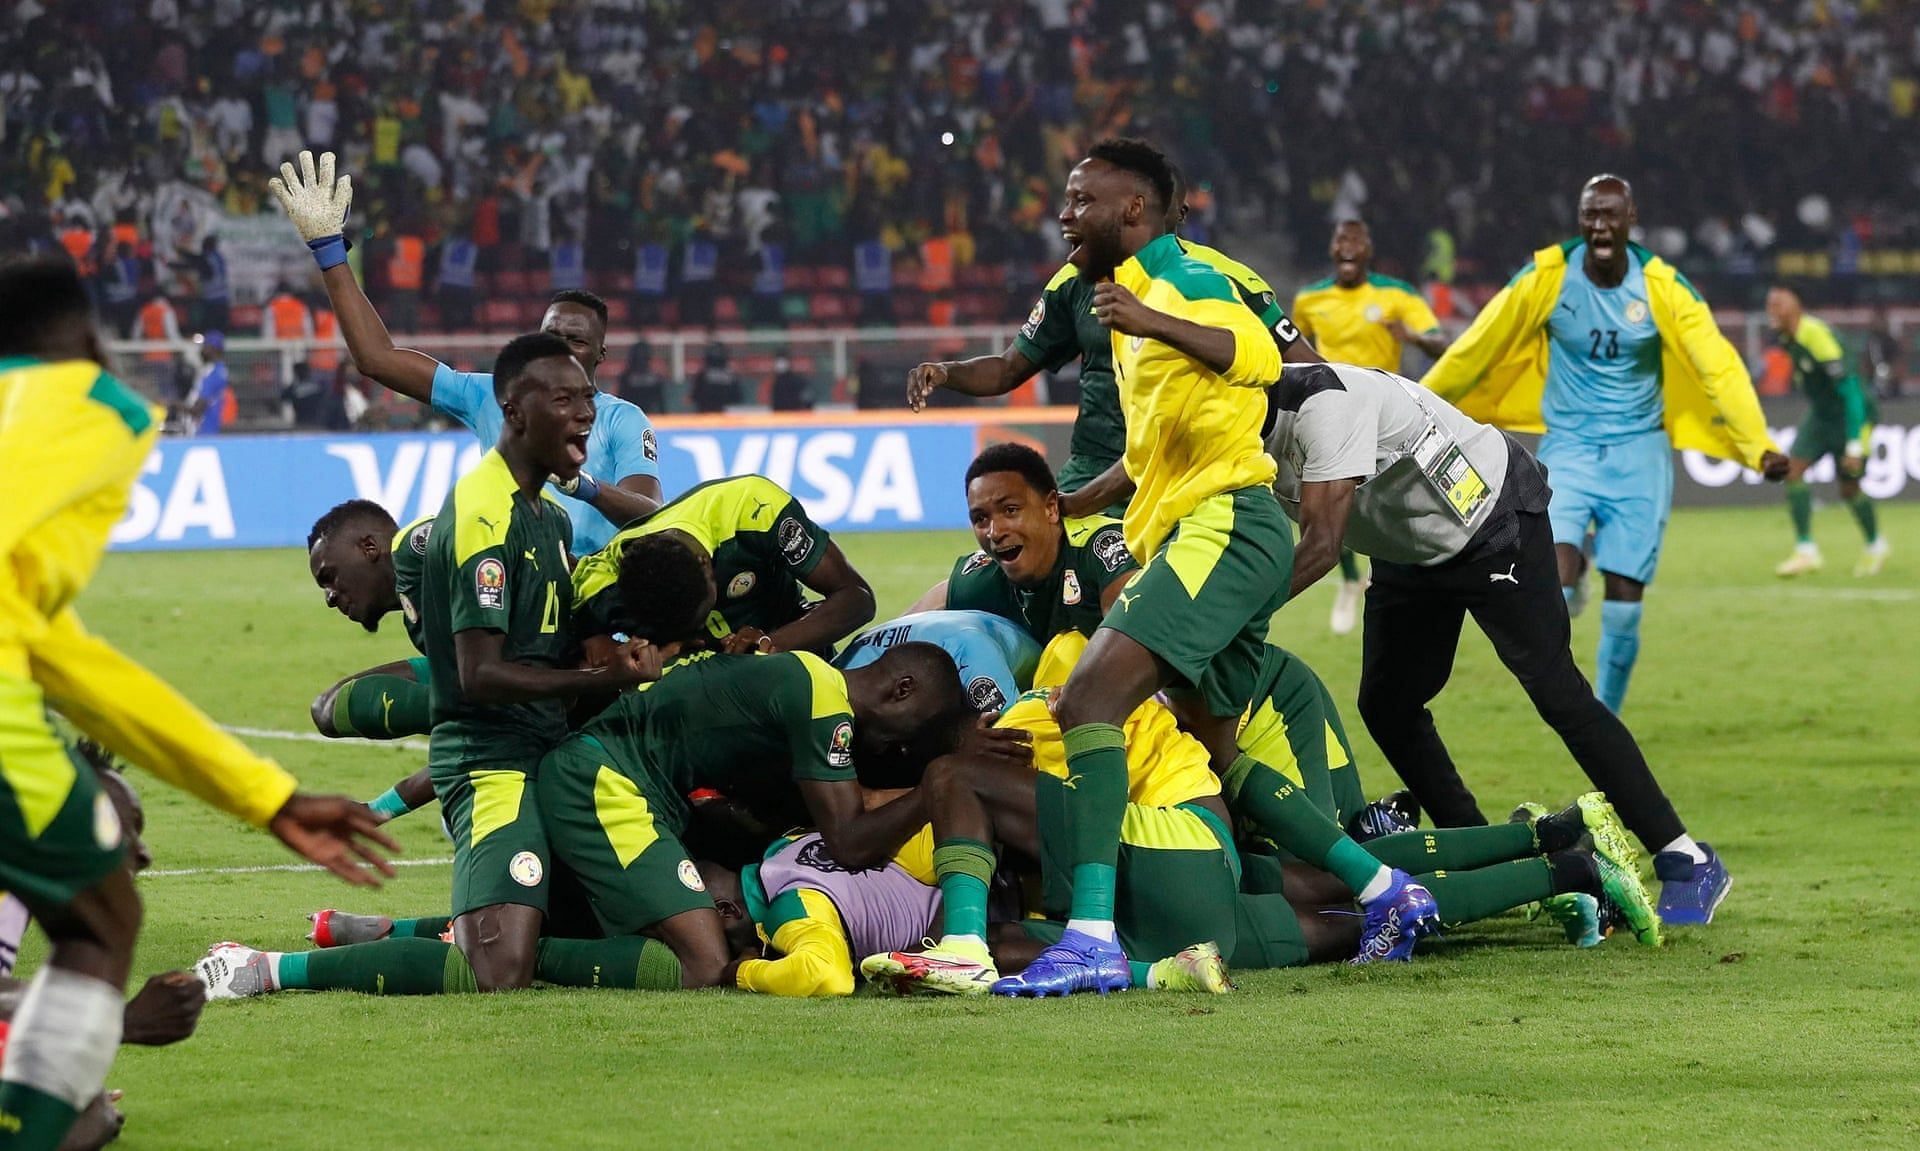 Senegal secured their first-ever AFCON title after beating Egypt on penalties.